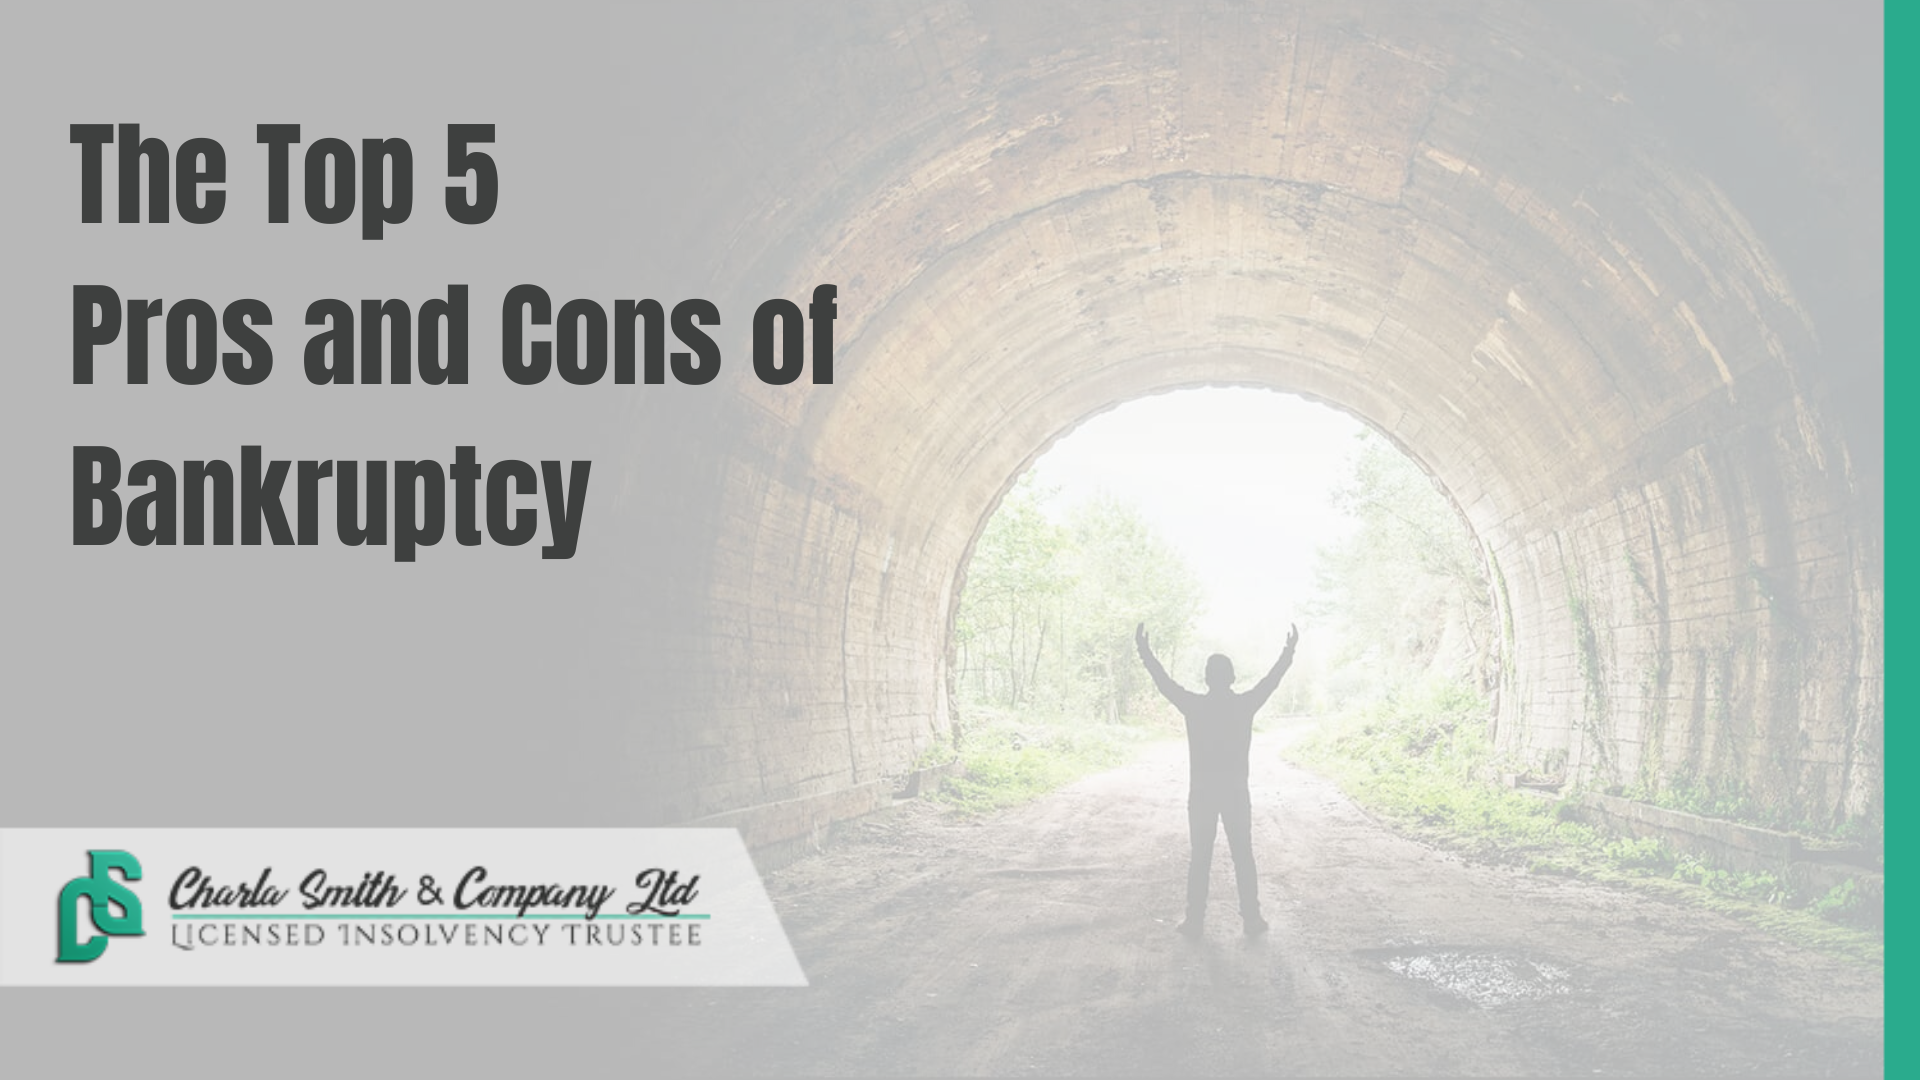 The Top 5 Pros and Cons of Bankruptcy